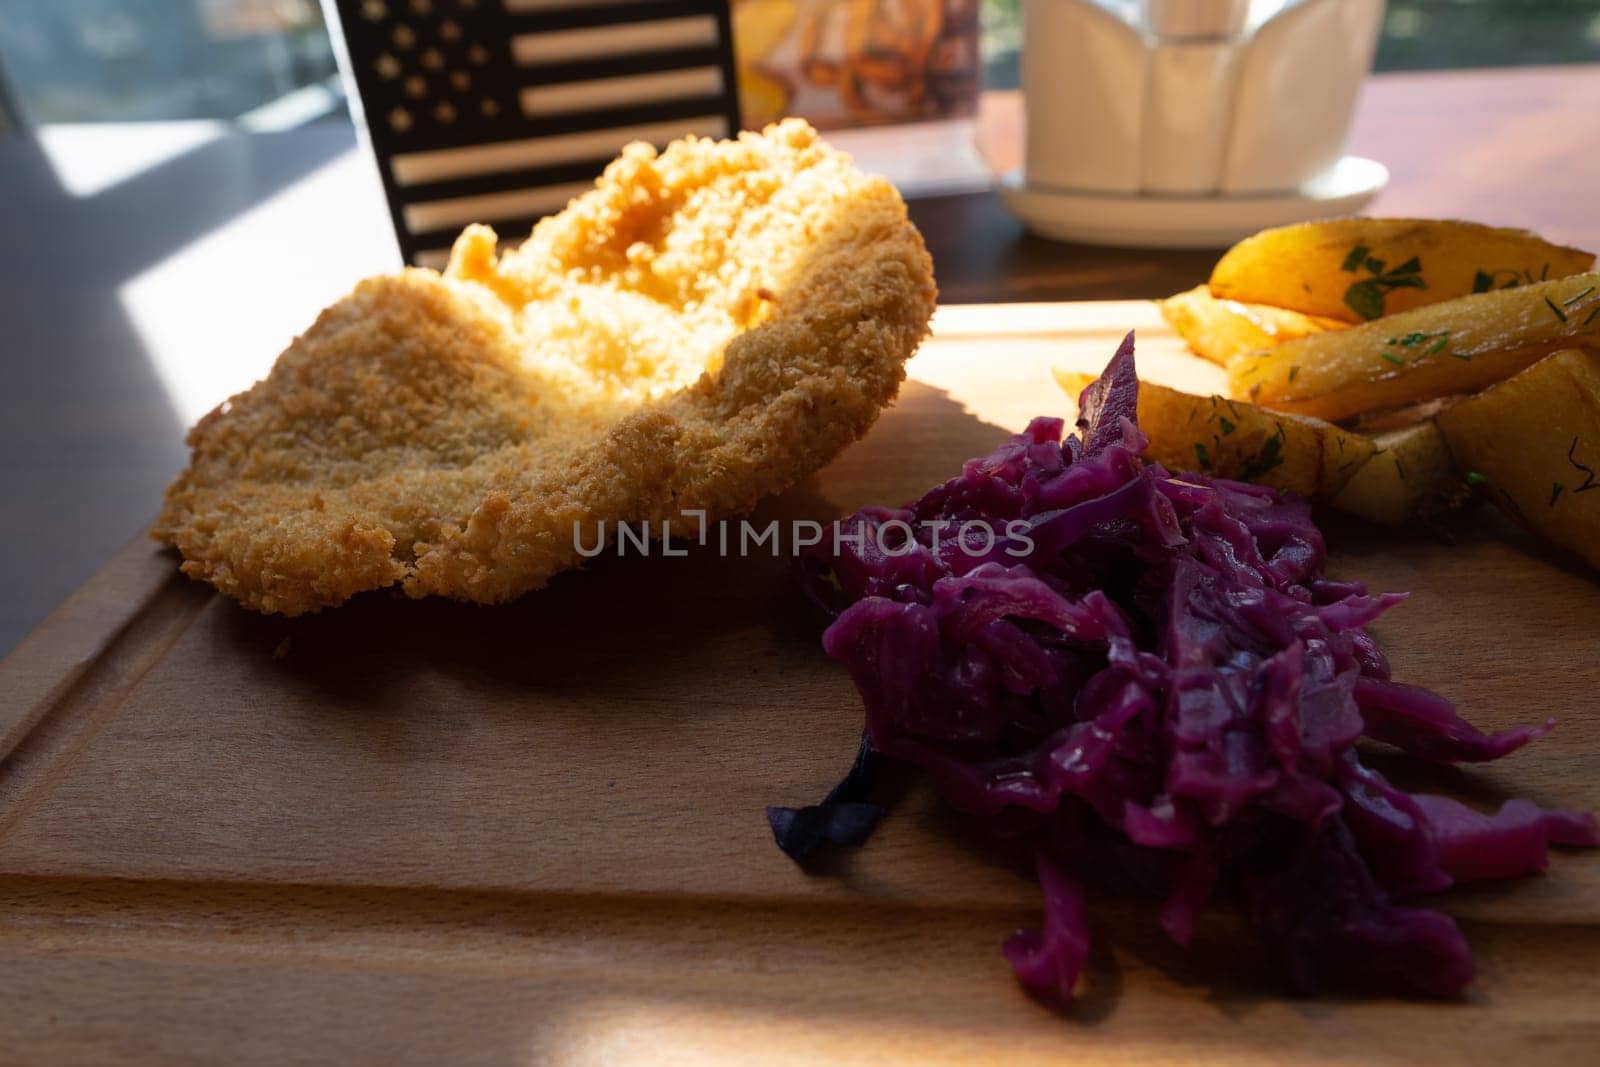 serving cutlets with salad on a wooden board by krol666